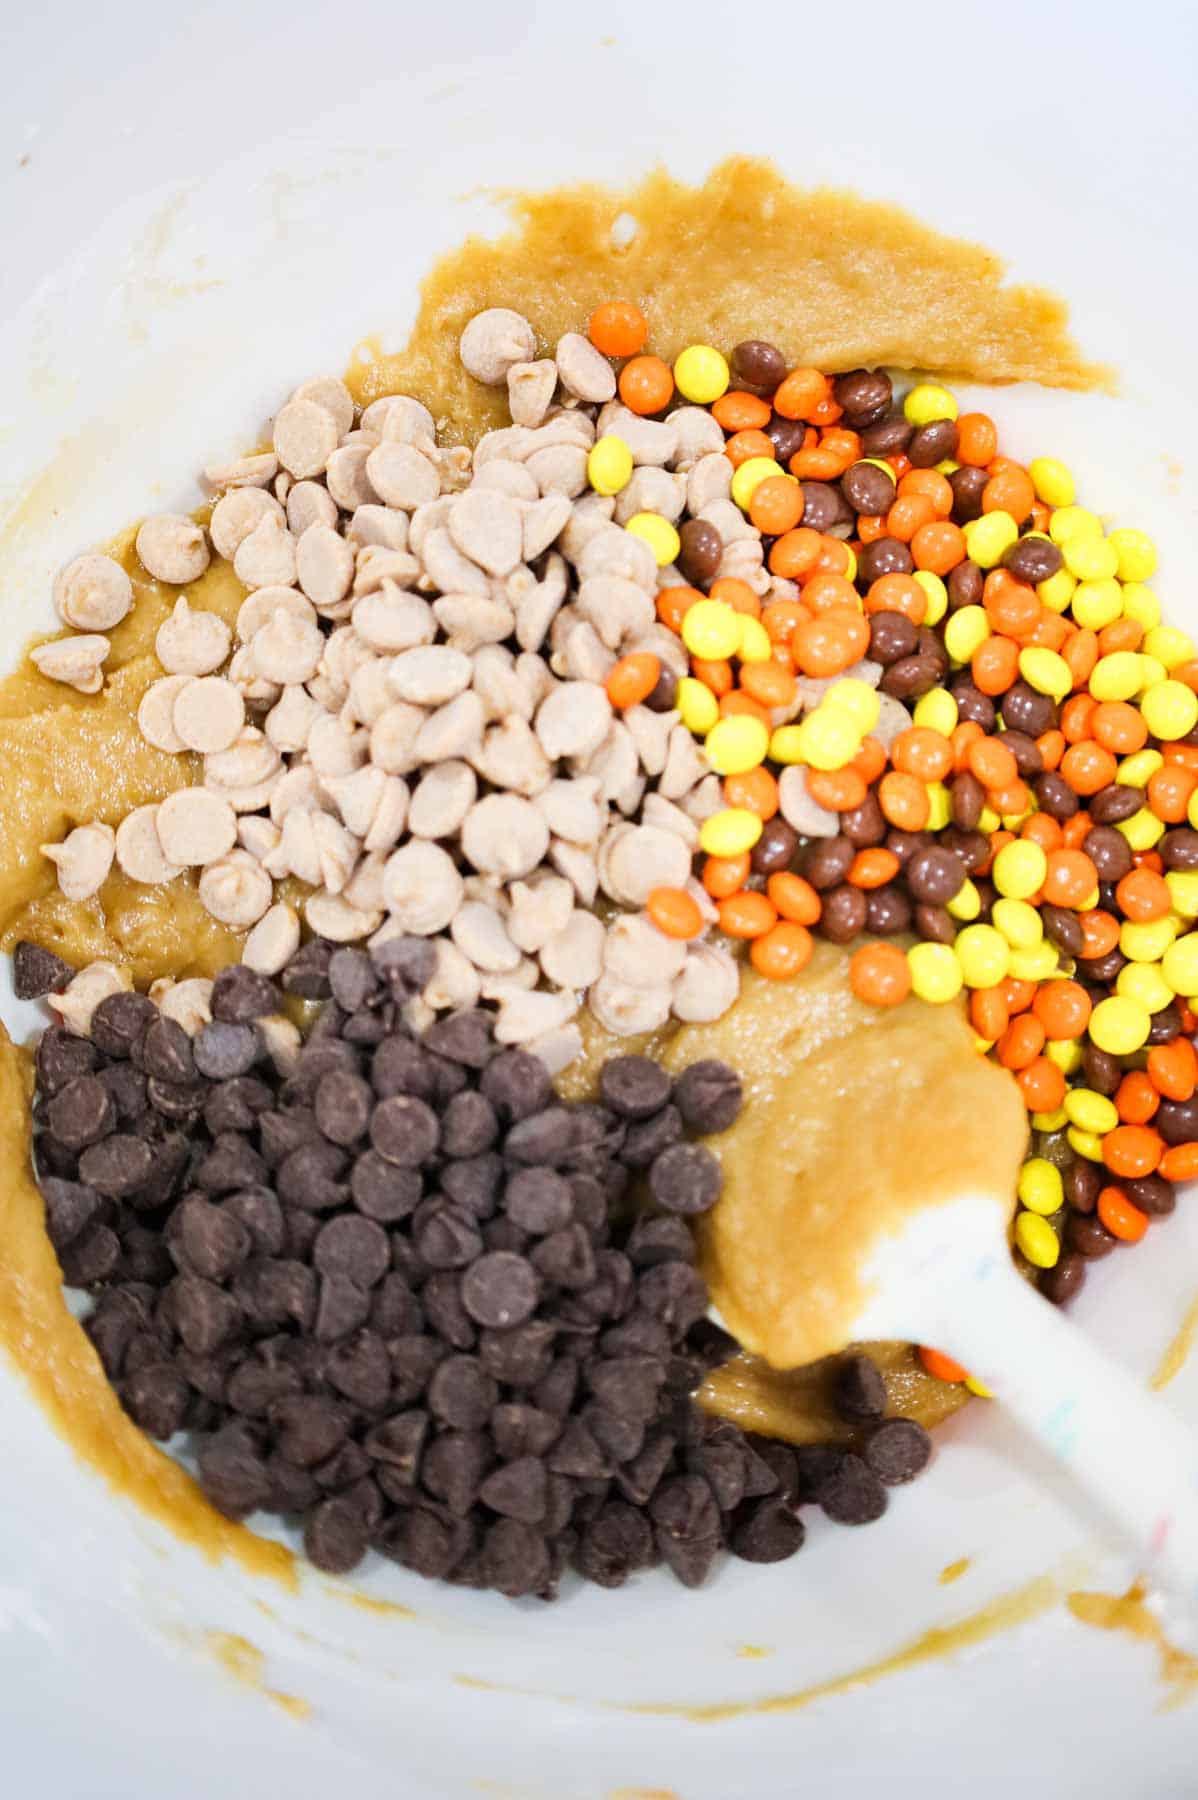 peanut butter baking chips, semi sweet chocolate chips and mini Reese's pieces candies on top of peanut butter blondie batter in a mixing bowl